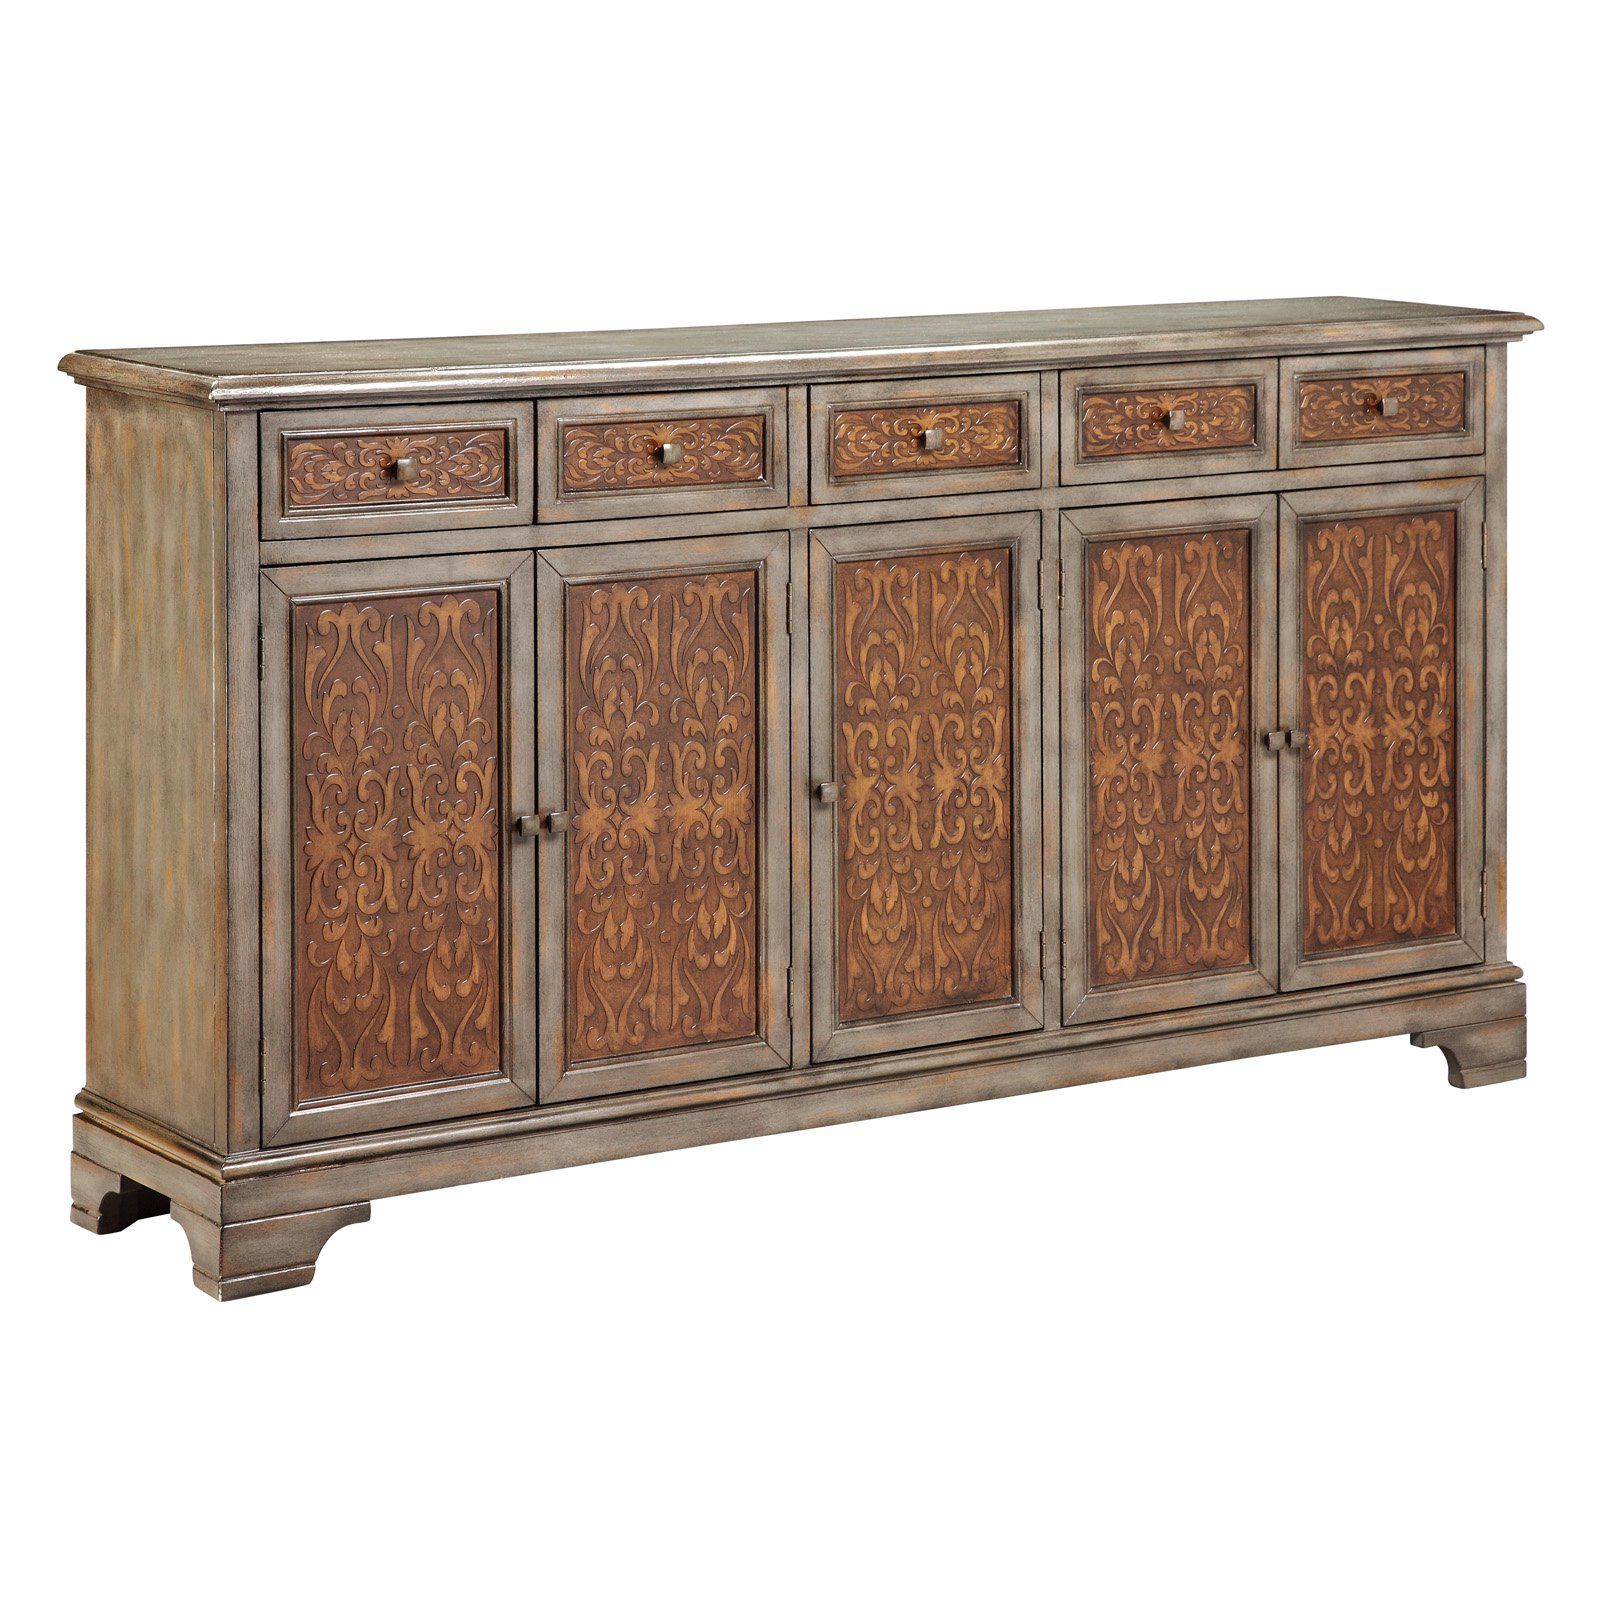 Stein World Cyrus Five Door Five Drawer Sideboard | Products Intended For Steinhatchee Reclaimed Pine 4 Door Sideboards (View 3 of 30)